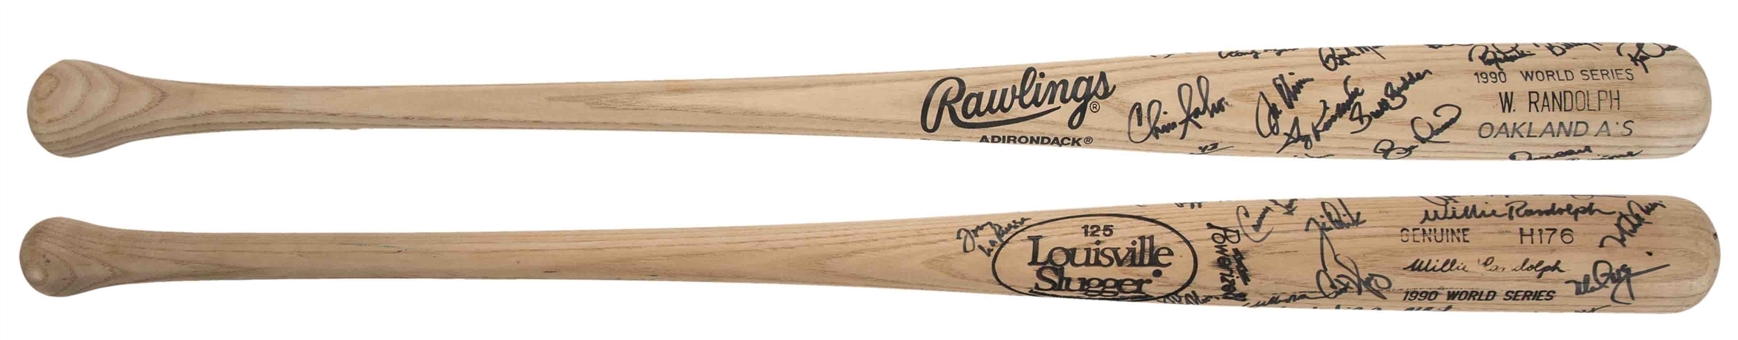 Lot of (2) 1990 World Series Team Signed Bats by both the Oakland As and Cincinnati Reds (Randolph LOA & JSA Auction LOA)